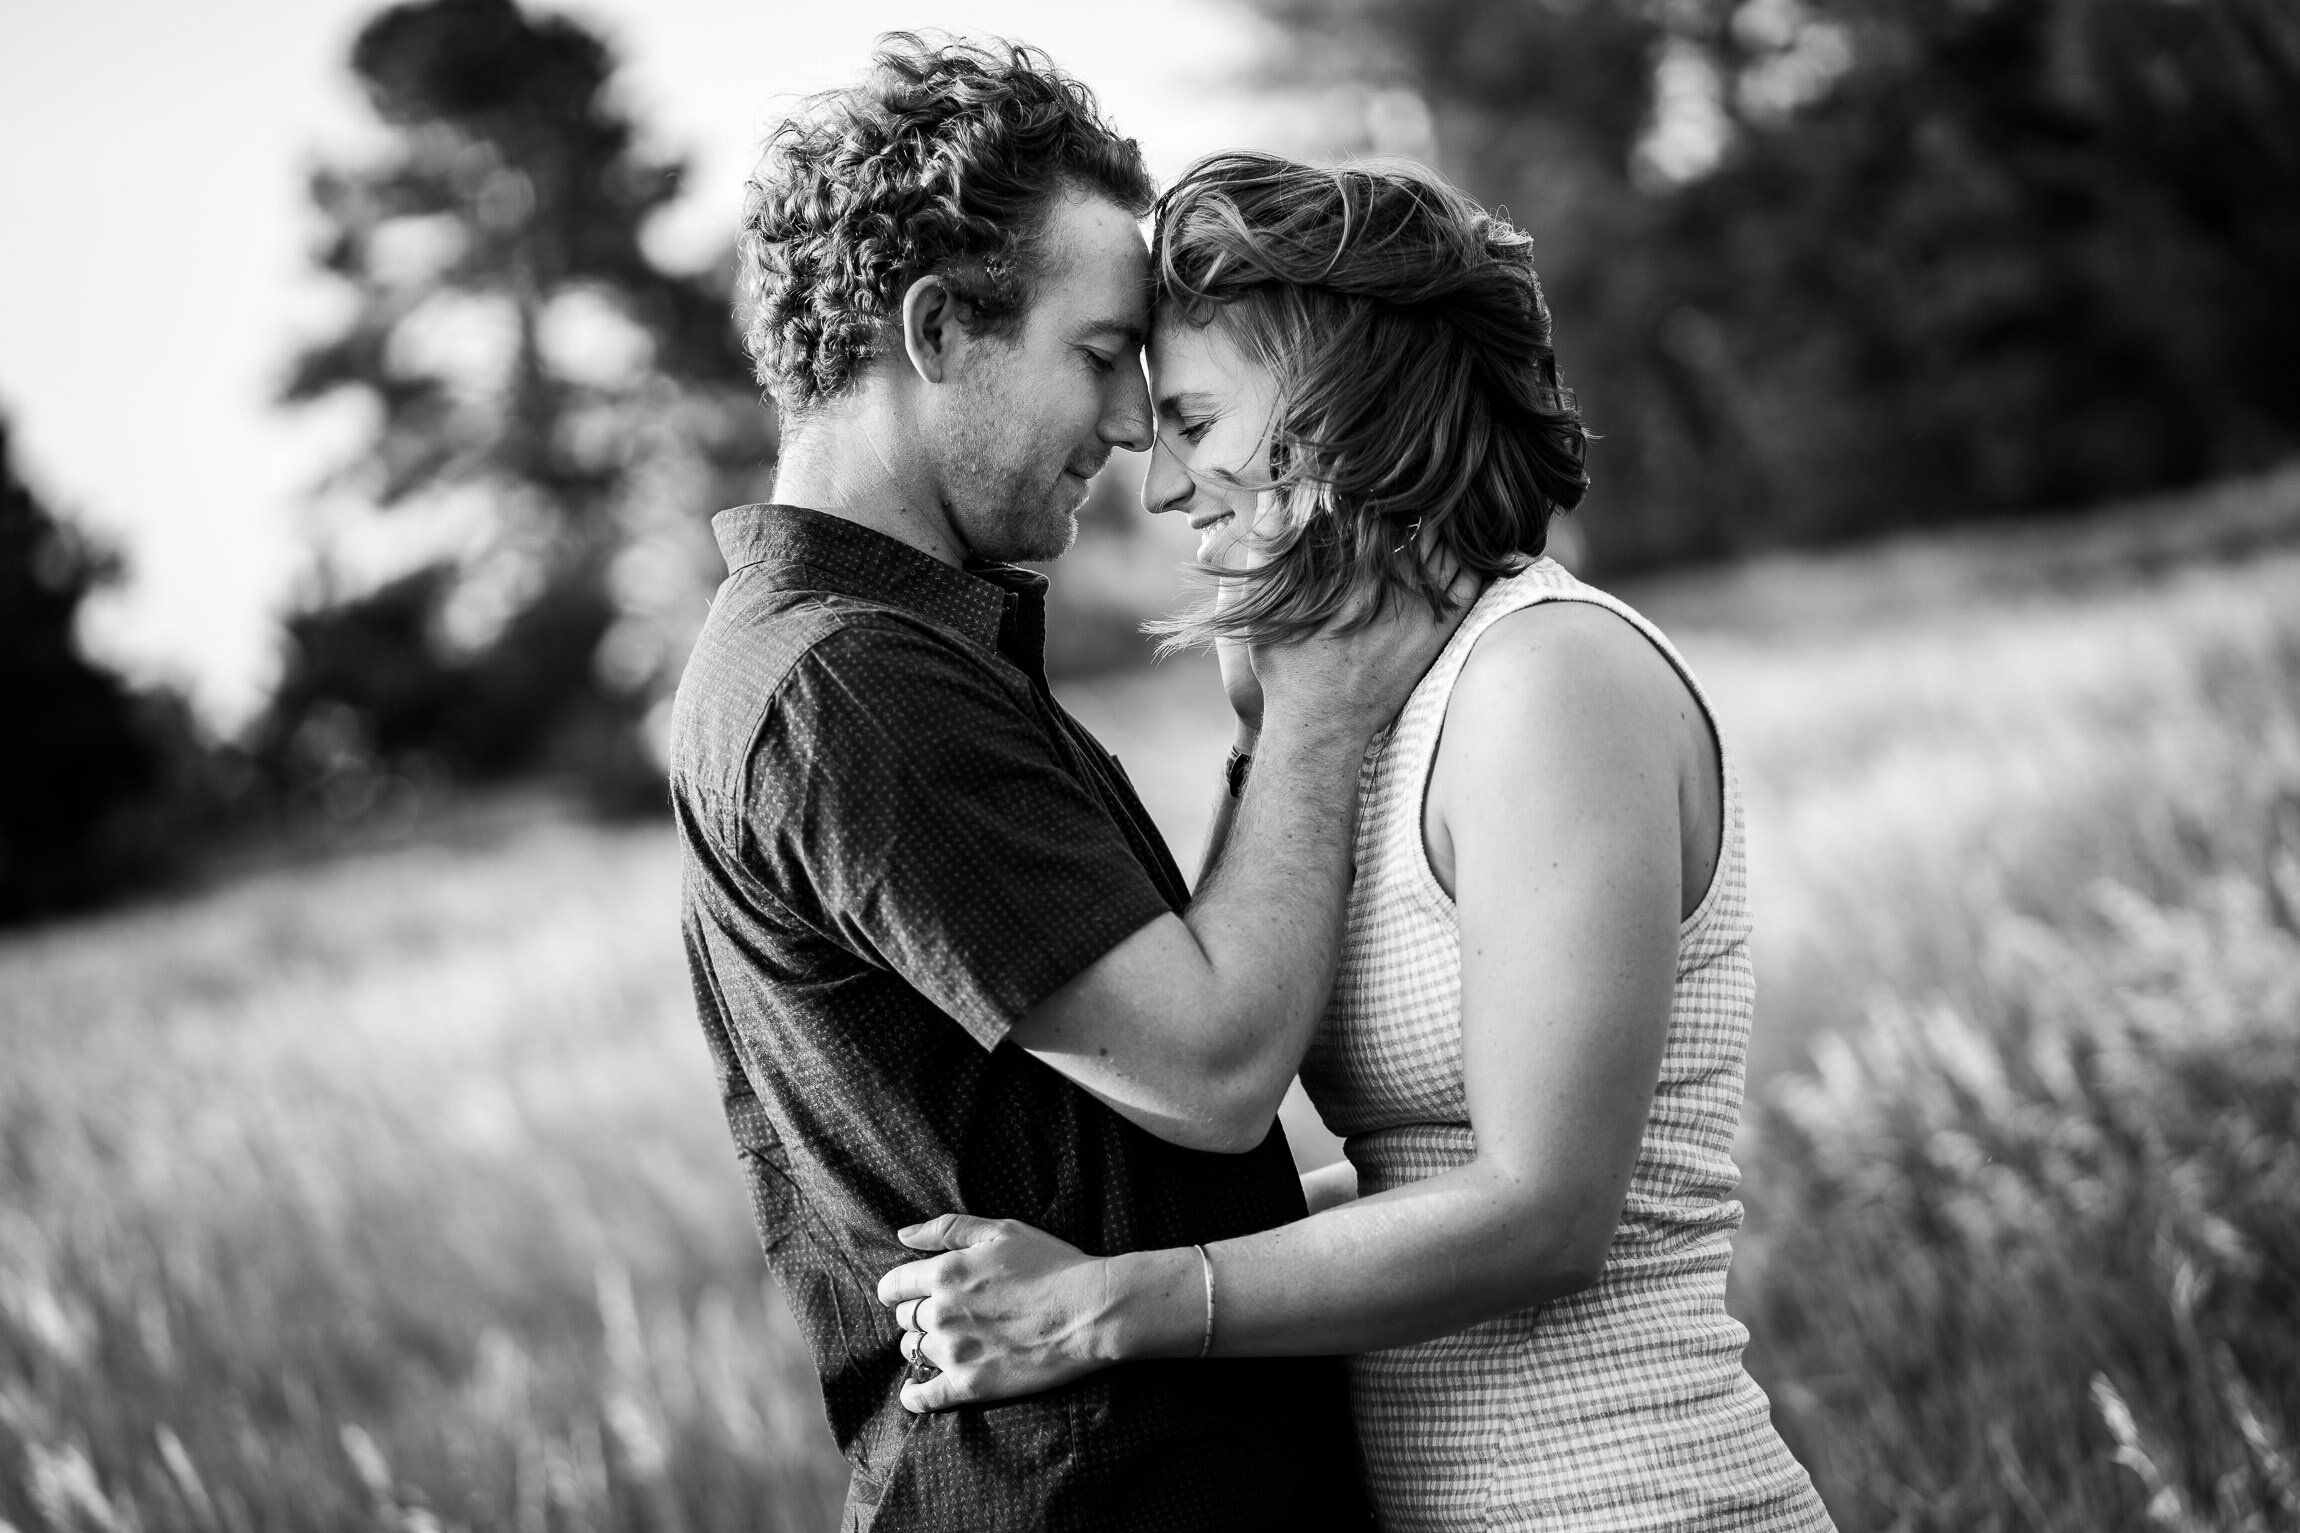 Engaged couple embraces for a portrait in tall windswept grass during golden hour, Engagement Session, Engagement Photos, Engagement Photos Inspiration, Engagement Photography, Engagement Photographer, Winter Engagement Photos, Mountain Engagement Photos, Denver engagement session, Denver engagement photos, Denver engagement photography, Denver engagement photographer, Denver engagement inspiration, Colorado engagement session, Colorado engagement photos, Colorado engagement photography, Colorado engagement photographer, Colorado engagement inspiration